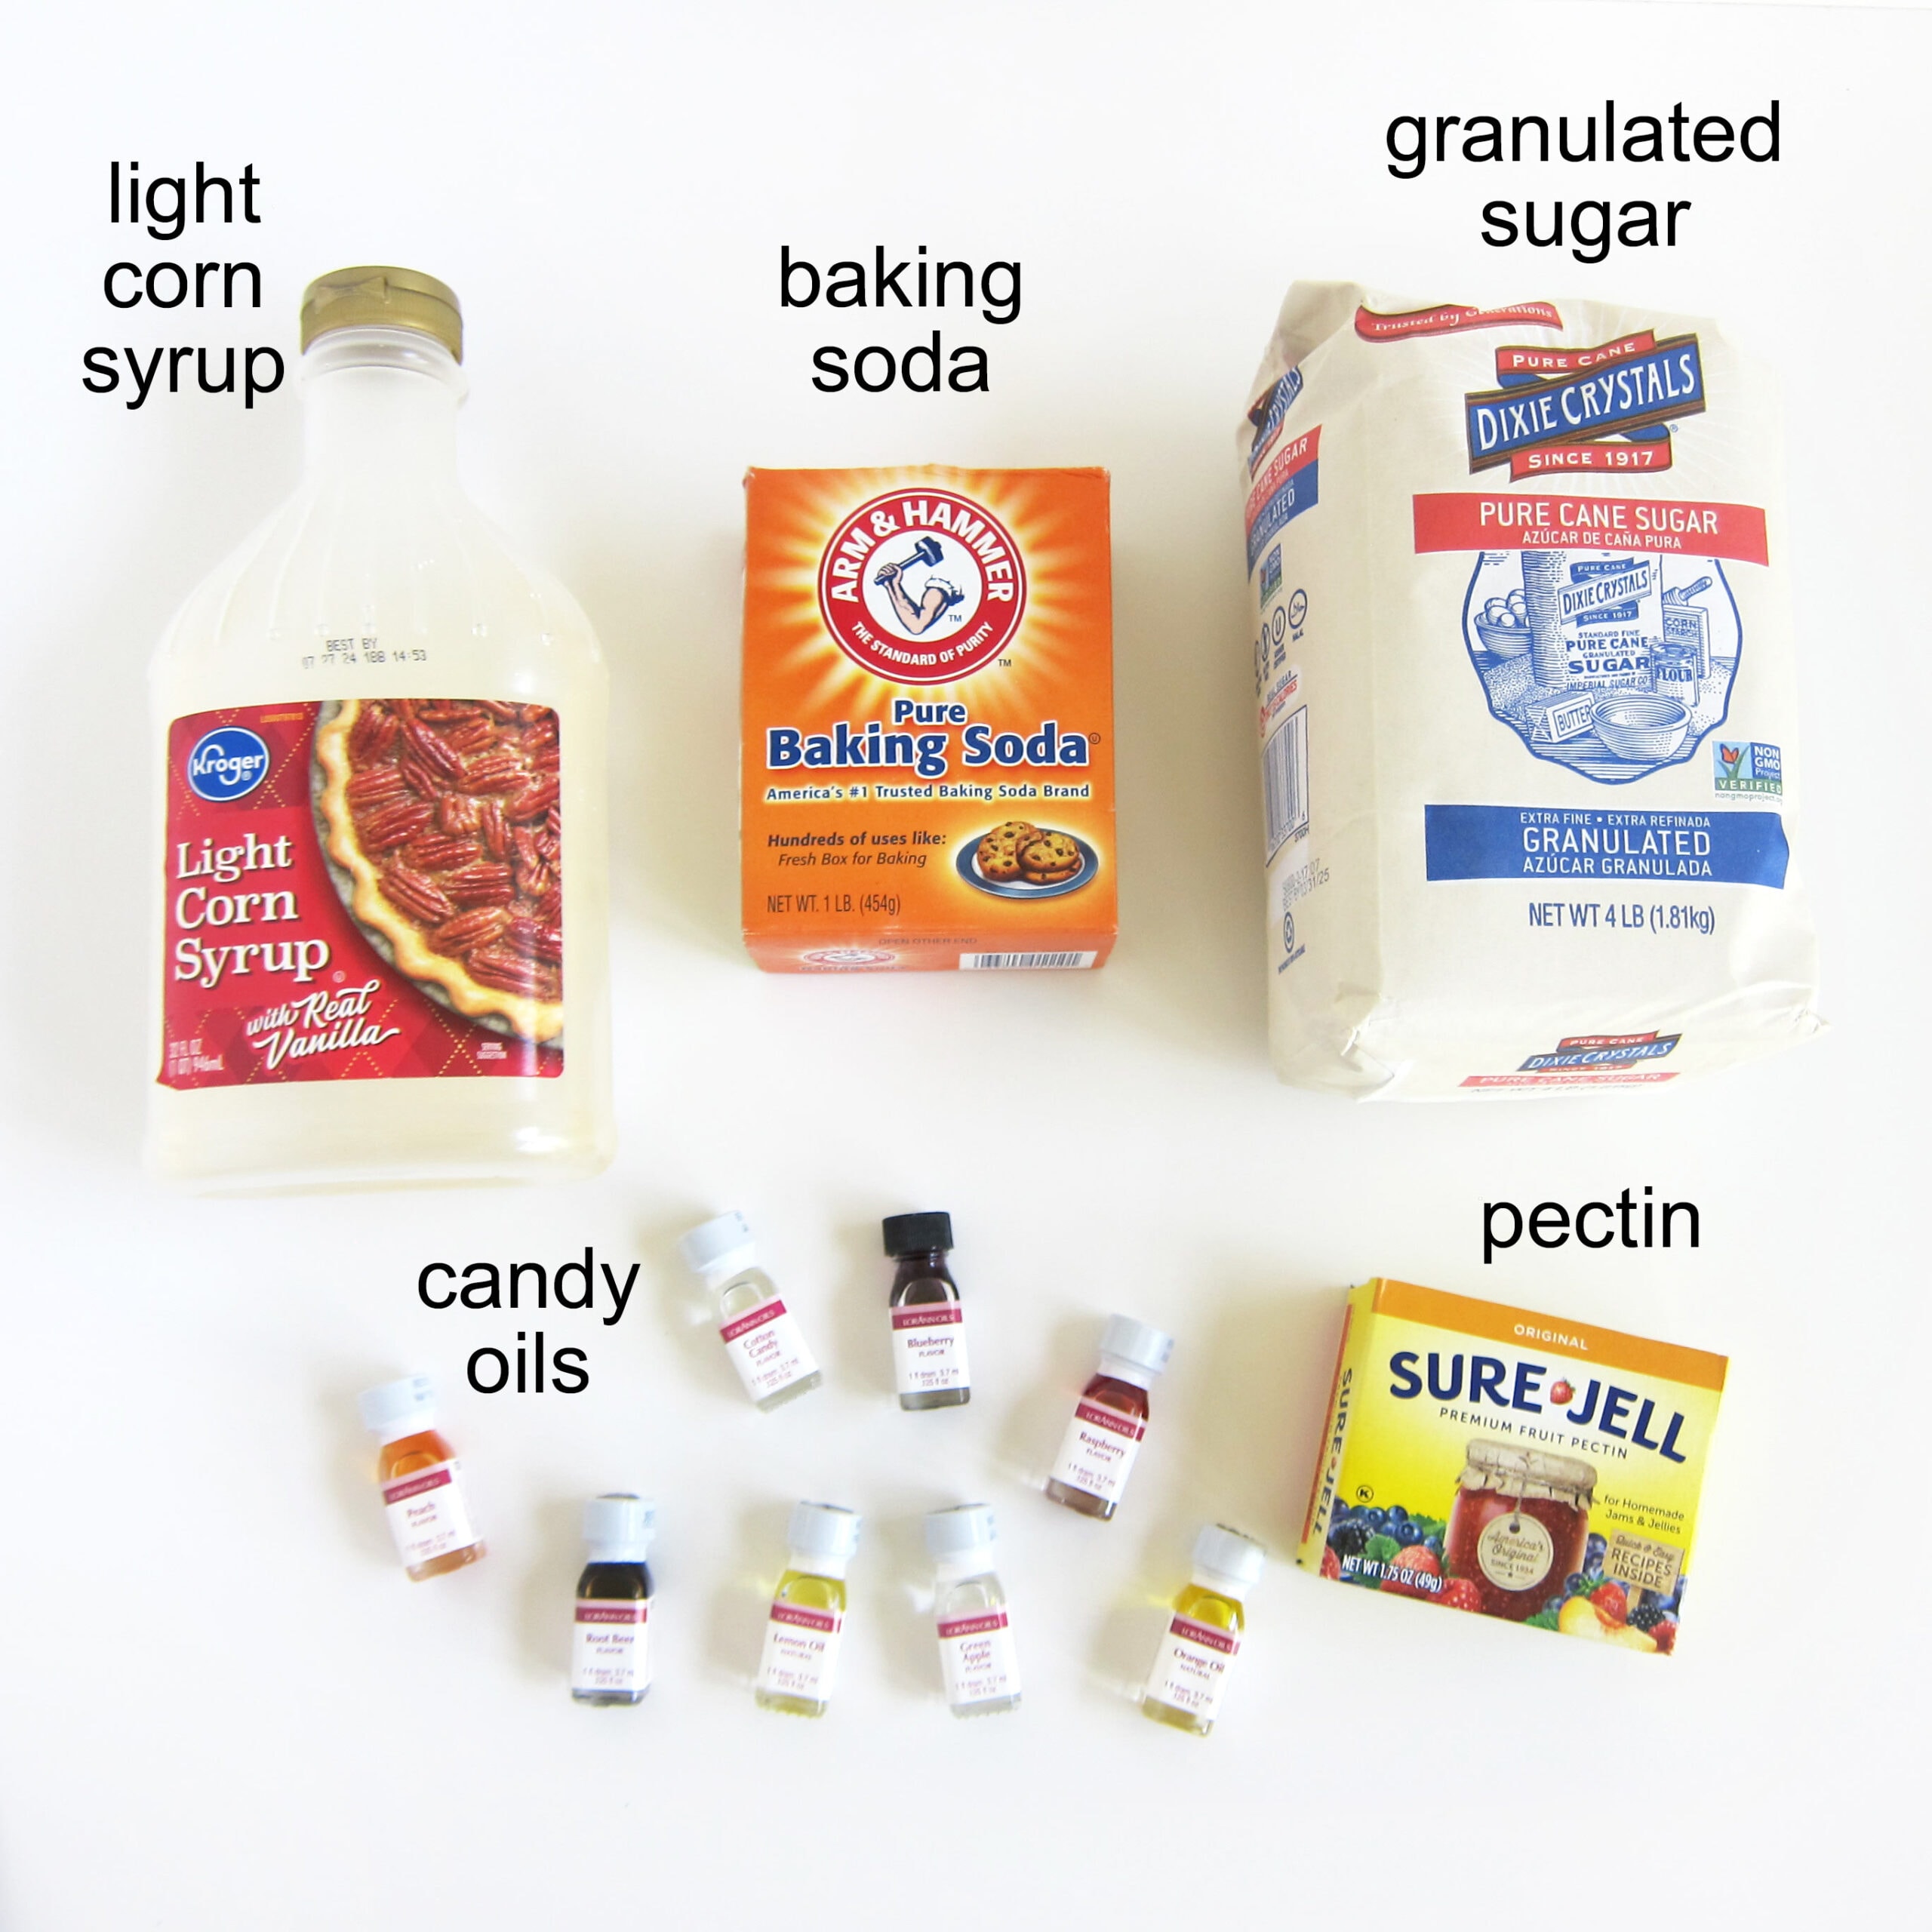 homemade gumdrops ingredients including corn syrup, baking soda, sugar, pectin, and candy oils.